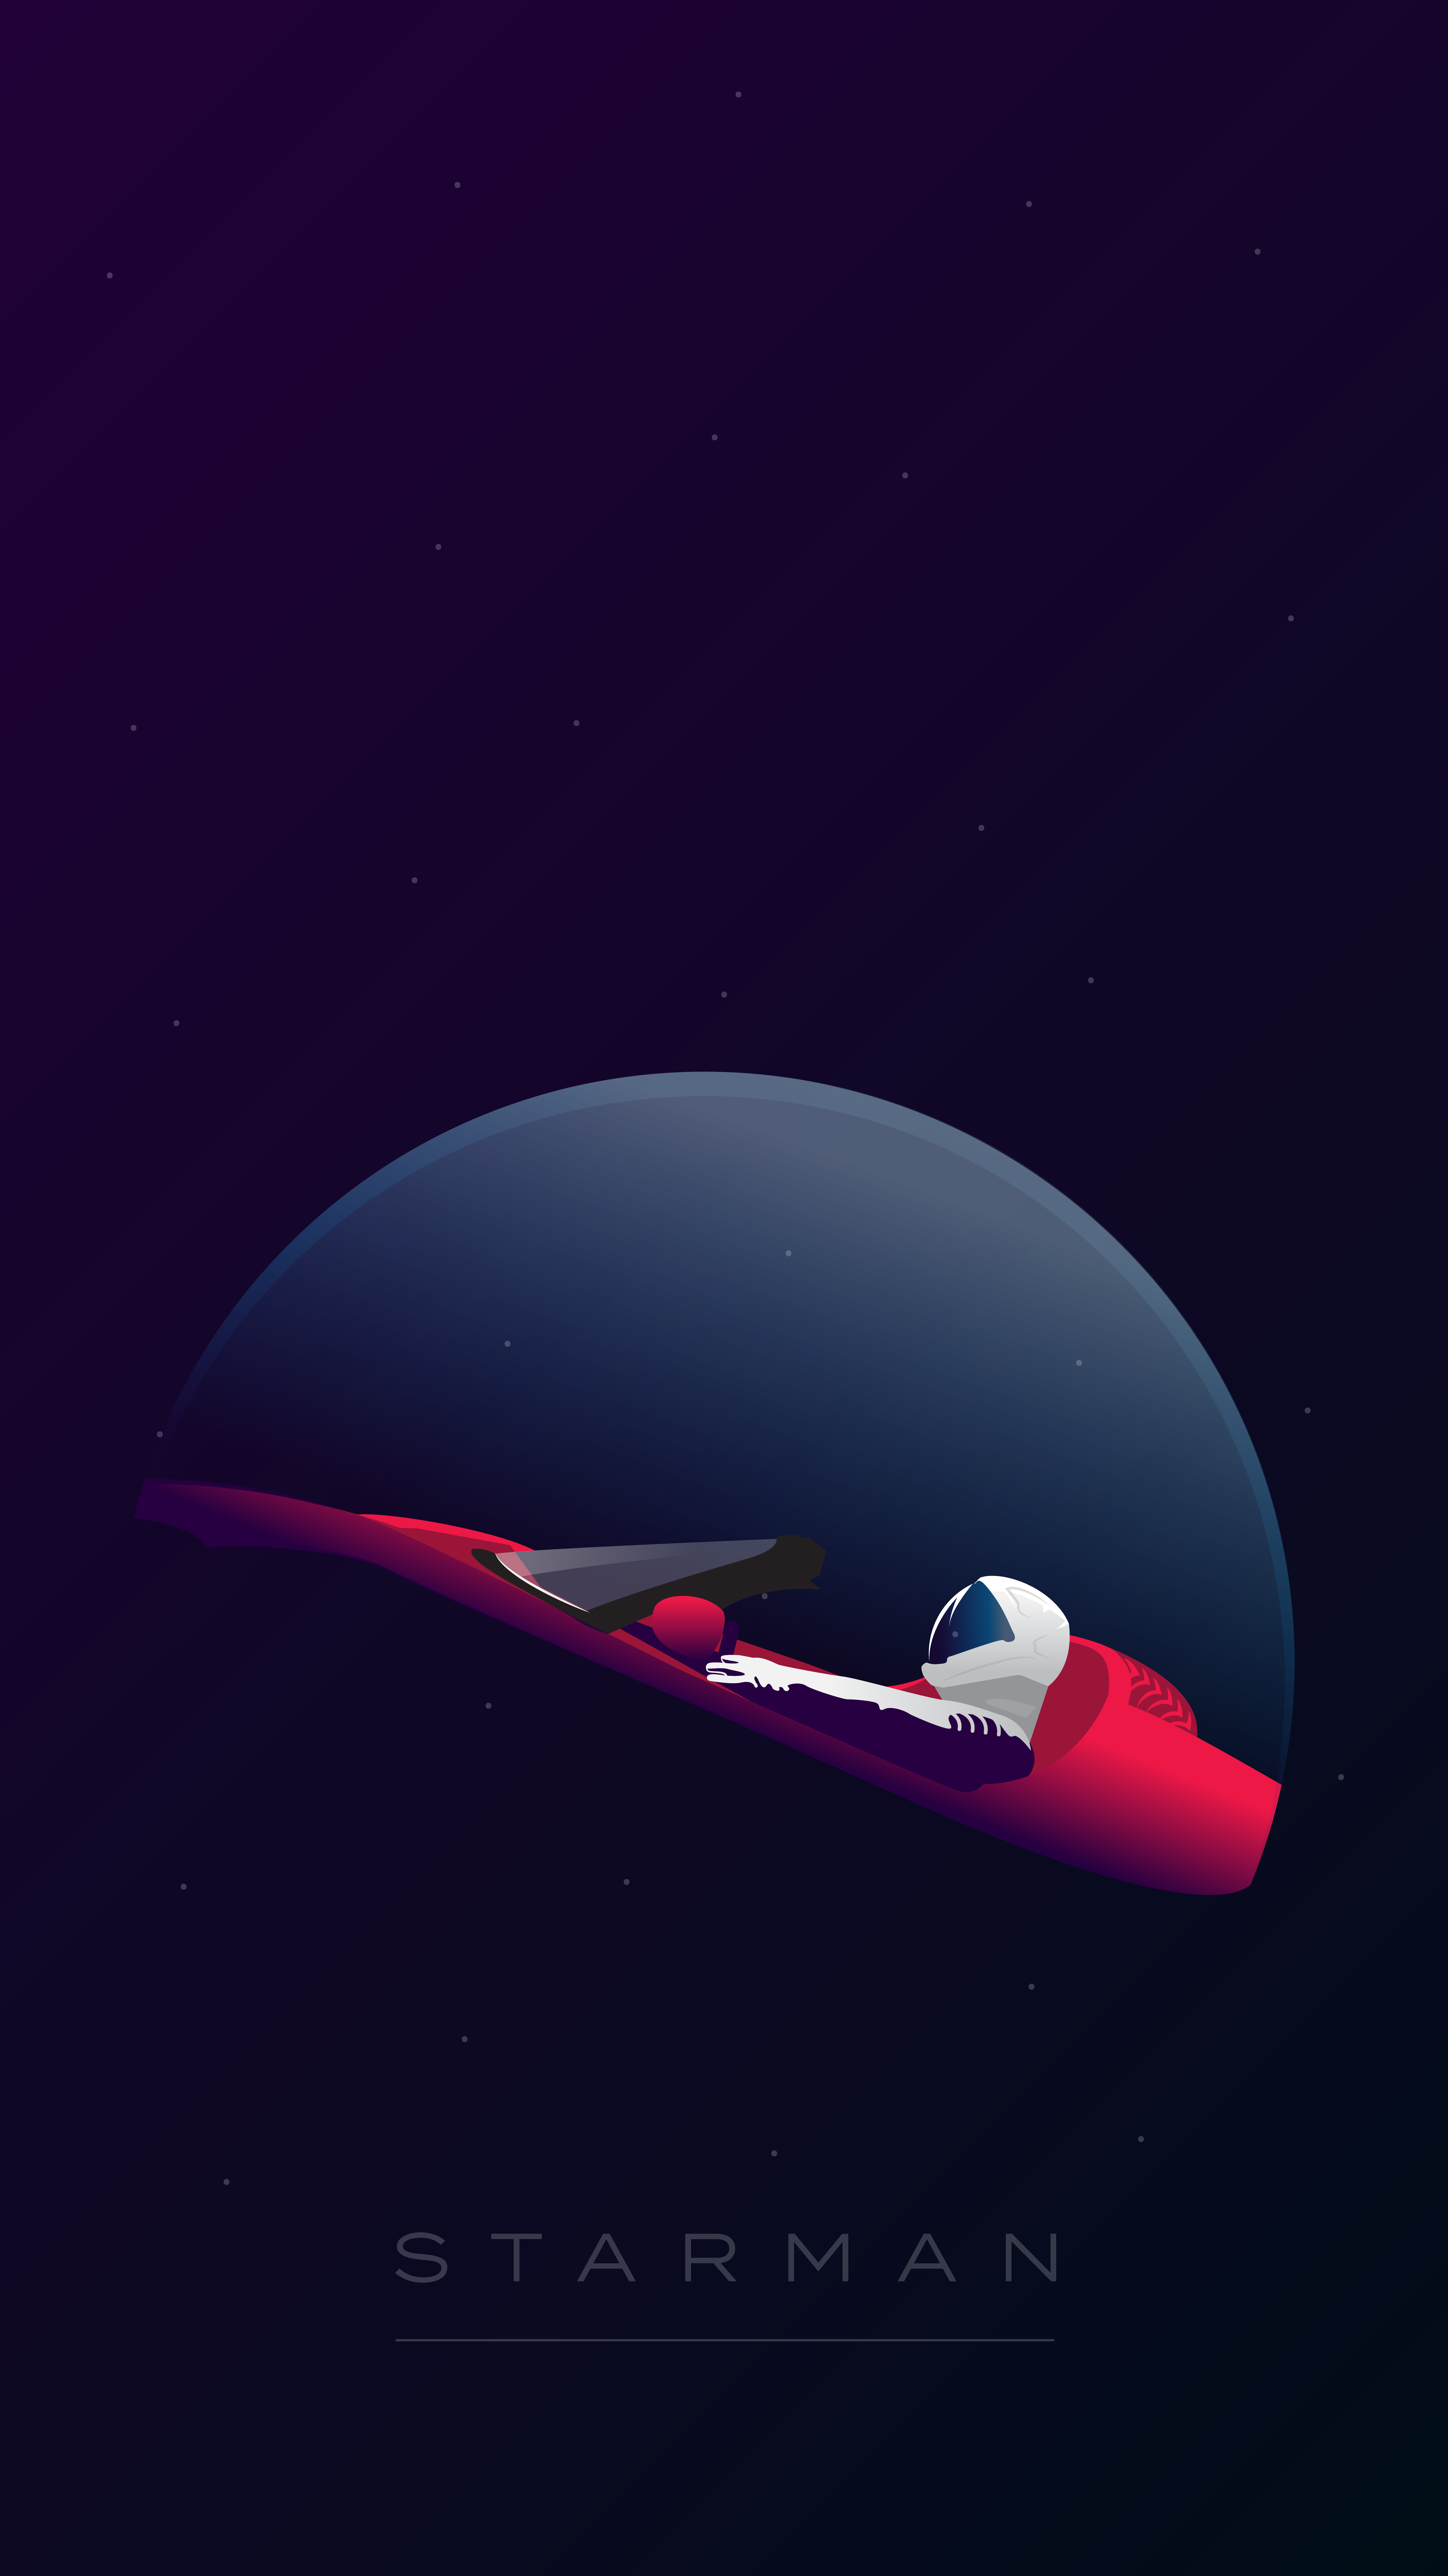 SpaceX Starman Wallpaper Inspired From Falcon Heavy's Tesla